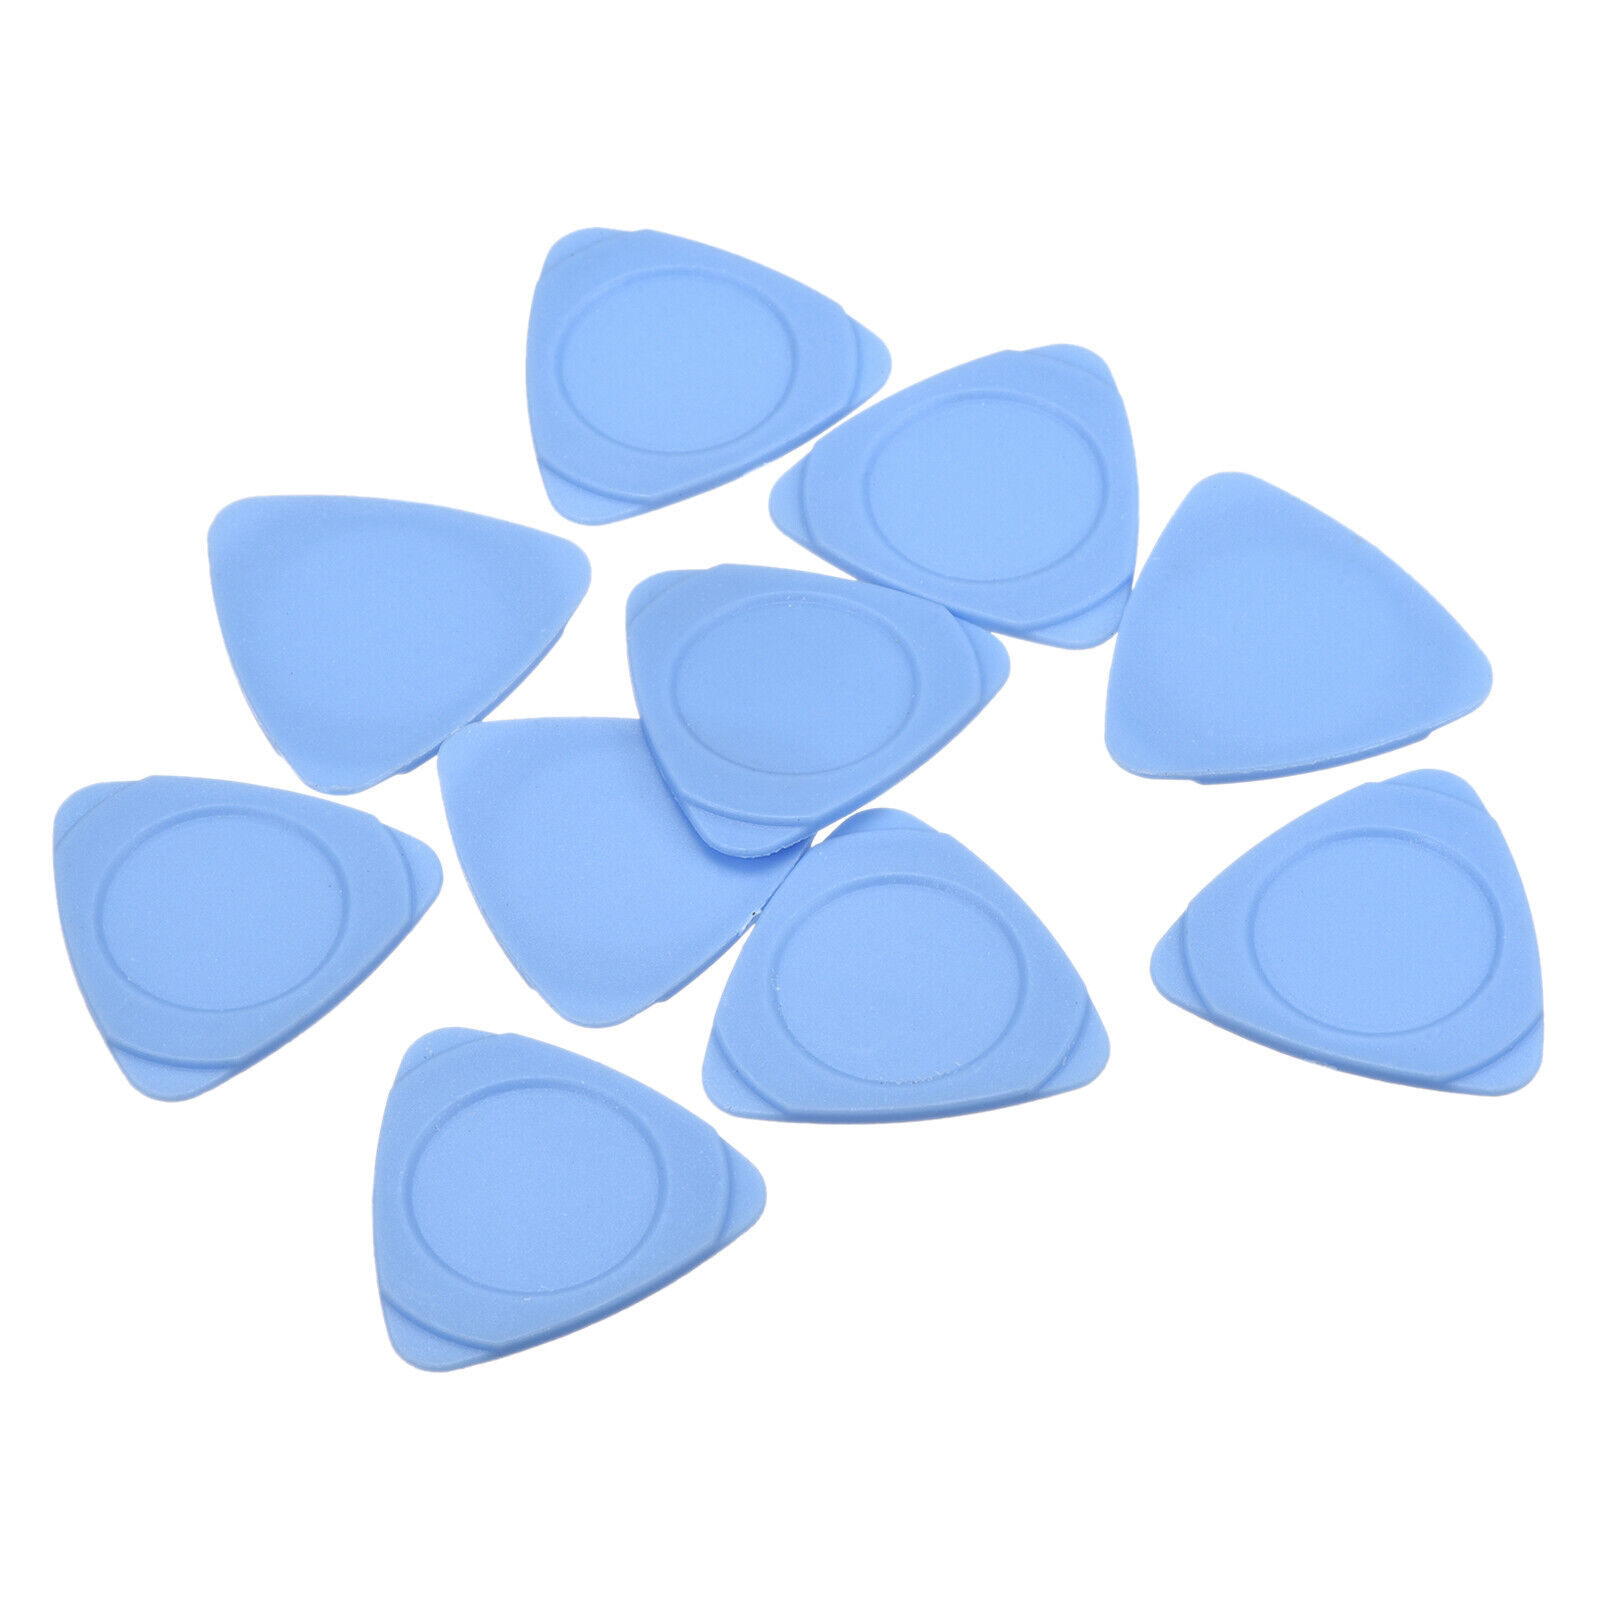 Phone Pry Opening Tools Plastic 25pcs Light Blue 1.7mm Thick